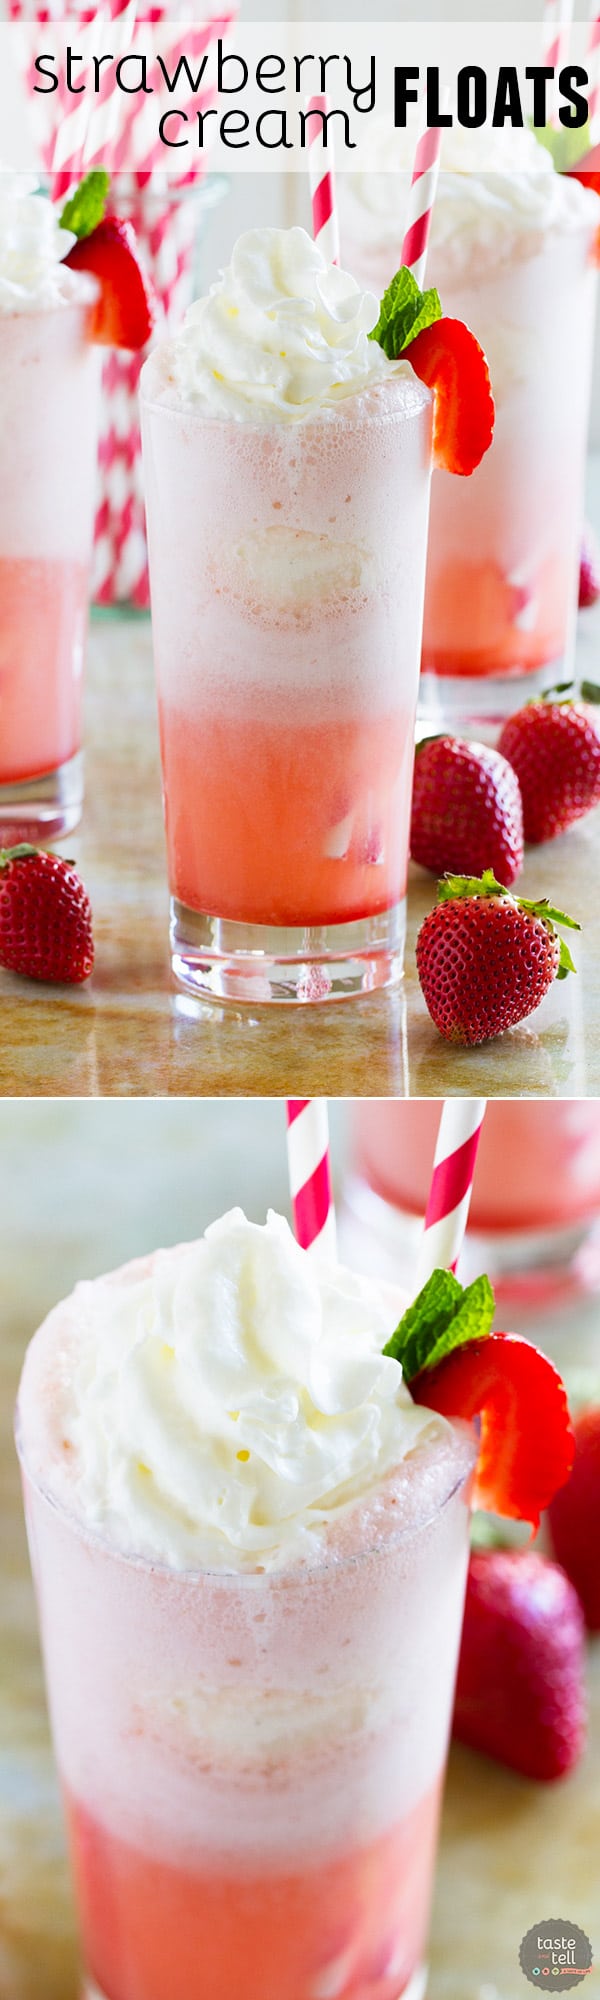 Root beer floats - move aside! These Strawberry Cream Floats are sweet and creamy and irresistible and perfect for a warm day.